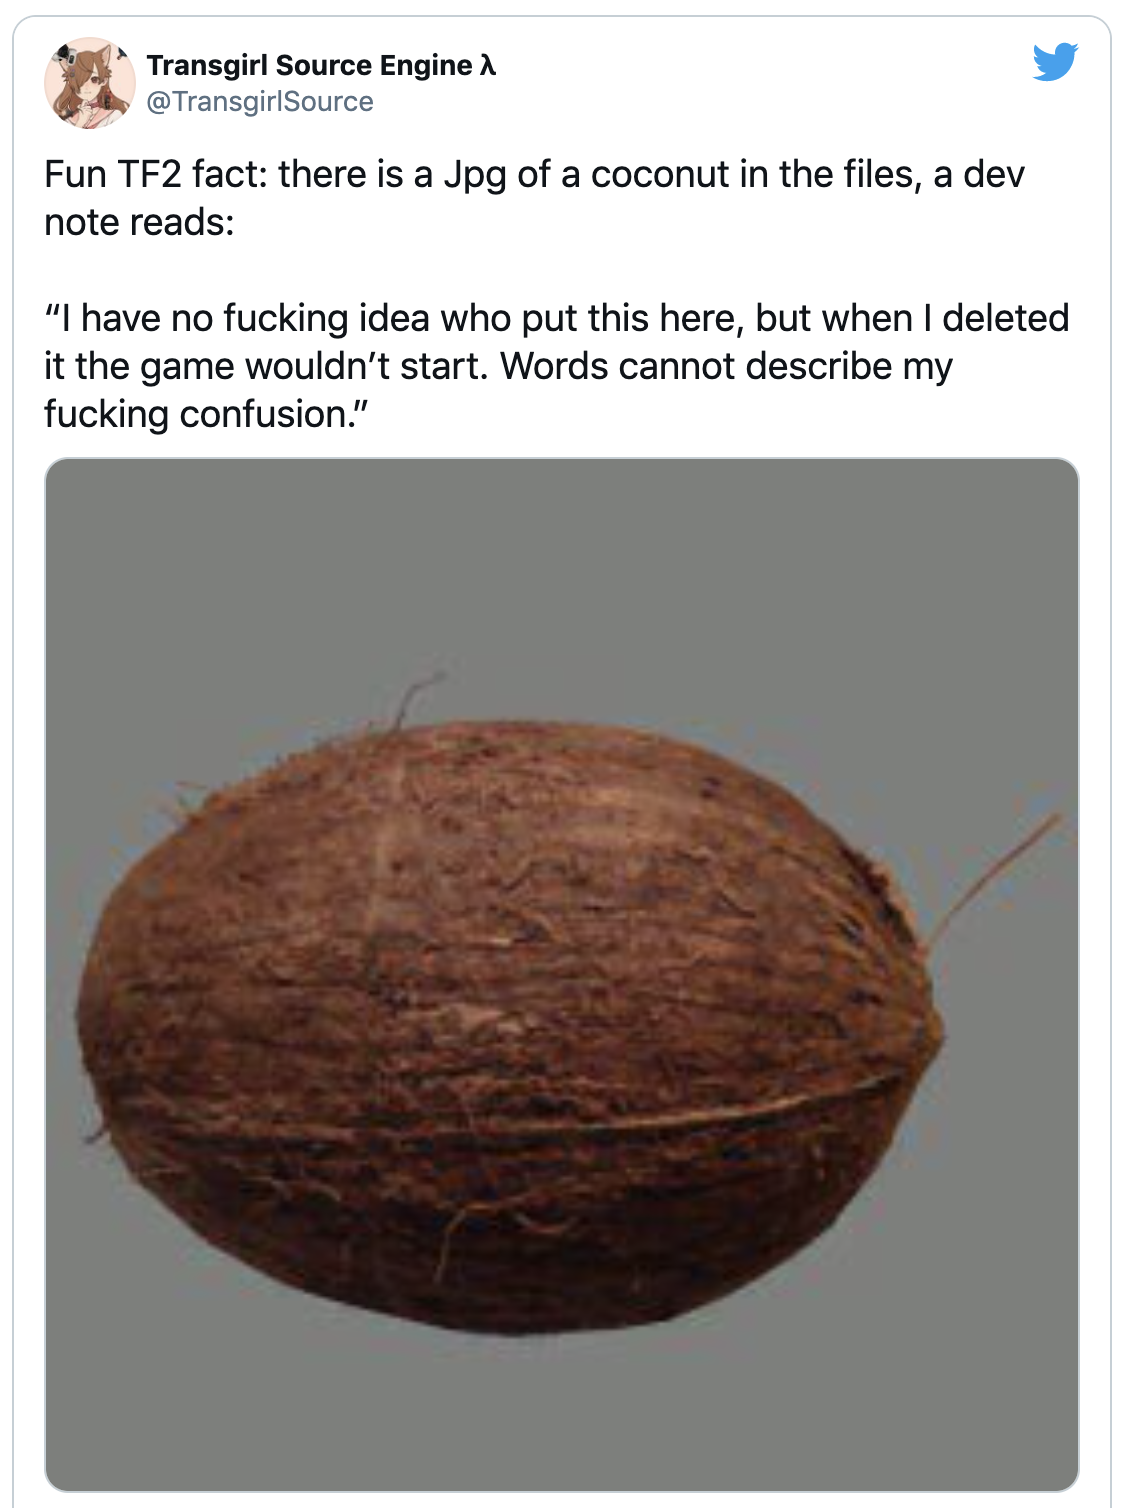 funny gaming memes - tf2 coconut jpg - Transgirl Source Engine TransgirlSource Fun TF2 fact there is a Jpg of a coconut in the files, a dev note reads "I have no fucking idea who put this here, but when I deleted it the game wouldn't start. Words cannot d